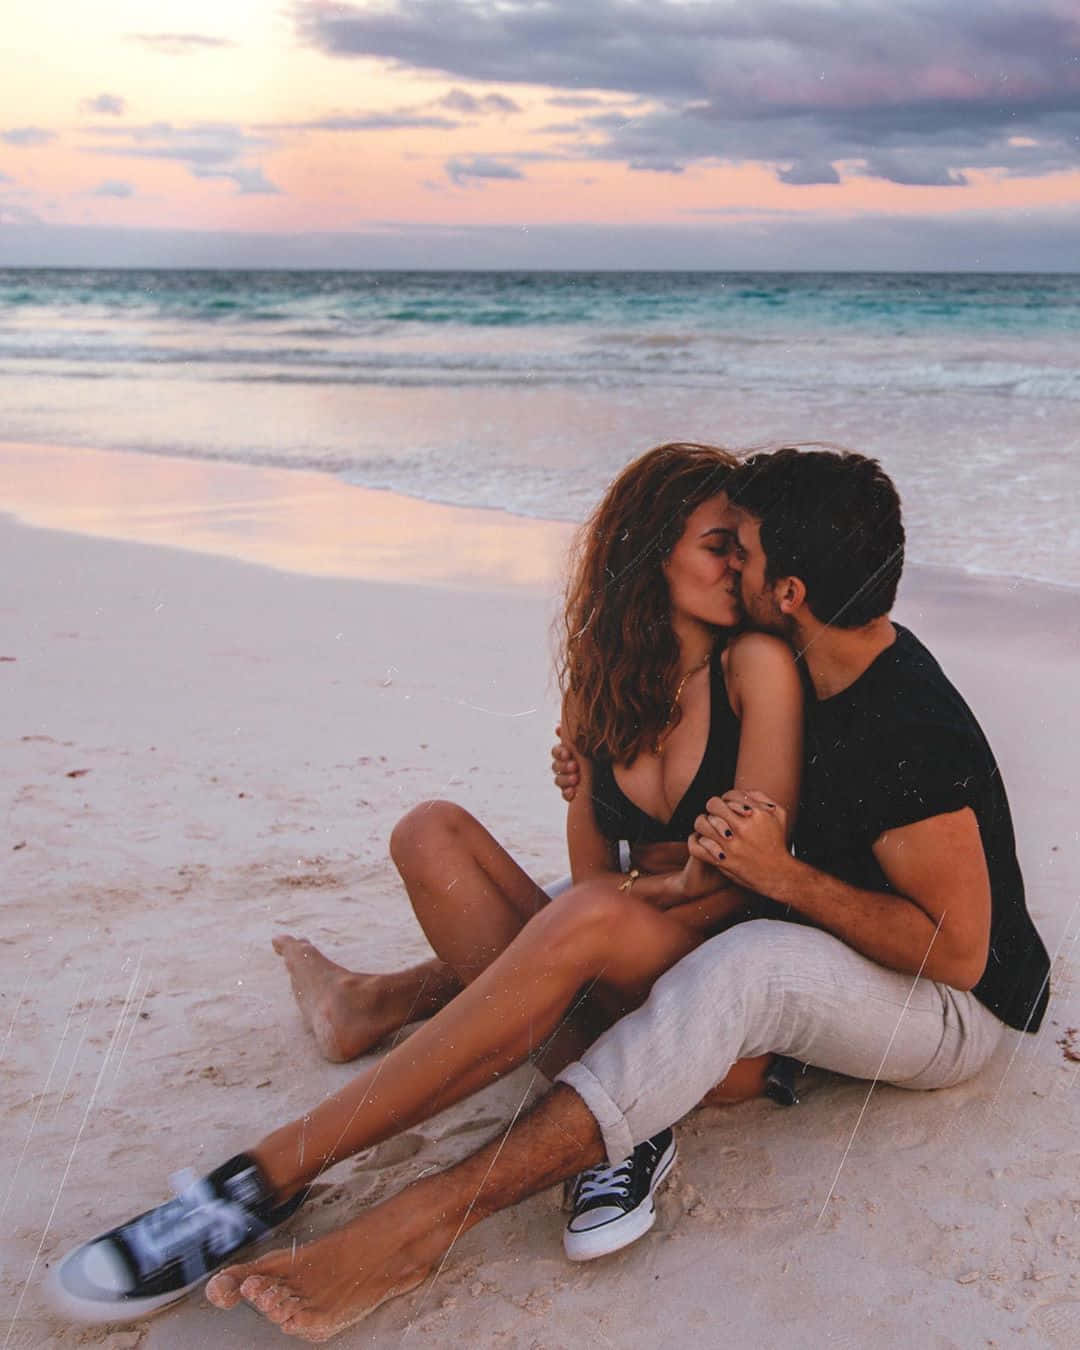 Download Relationship Goals Kissing On Beach Pictures | Wallpapers.com